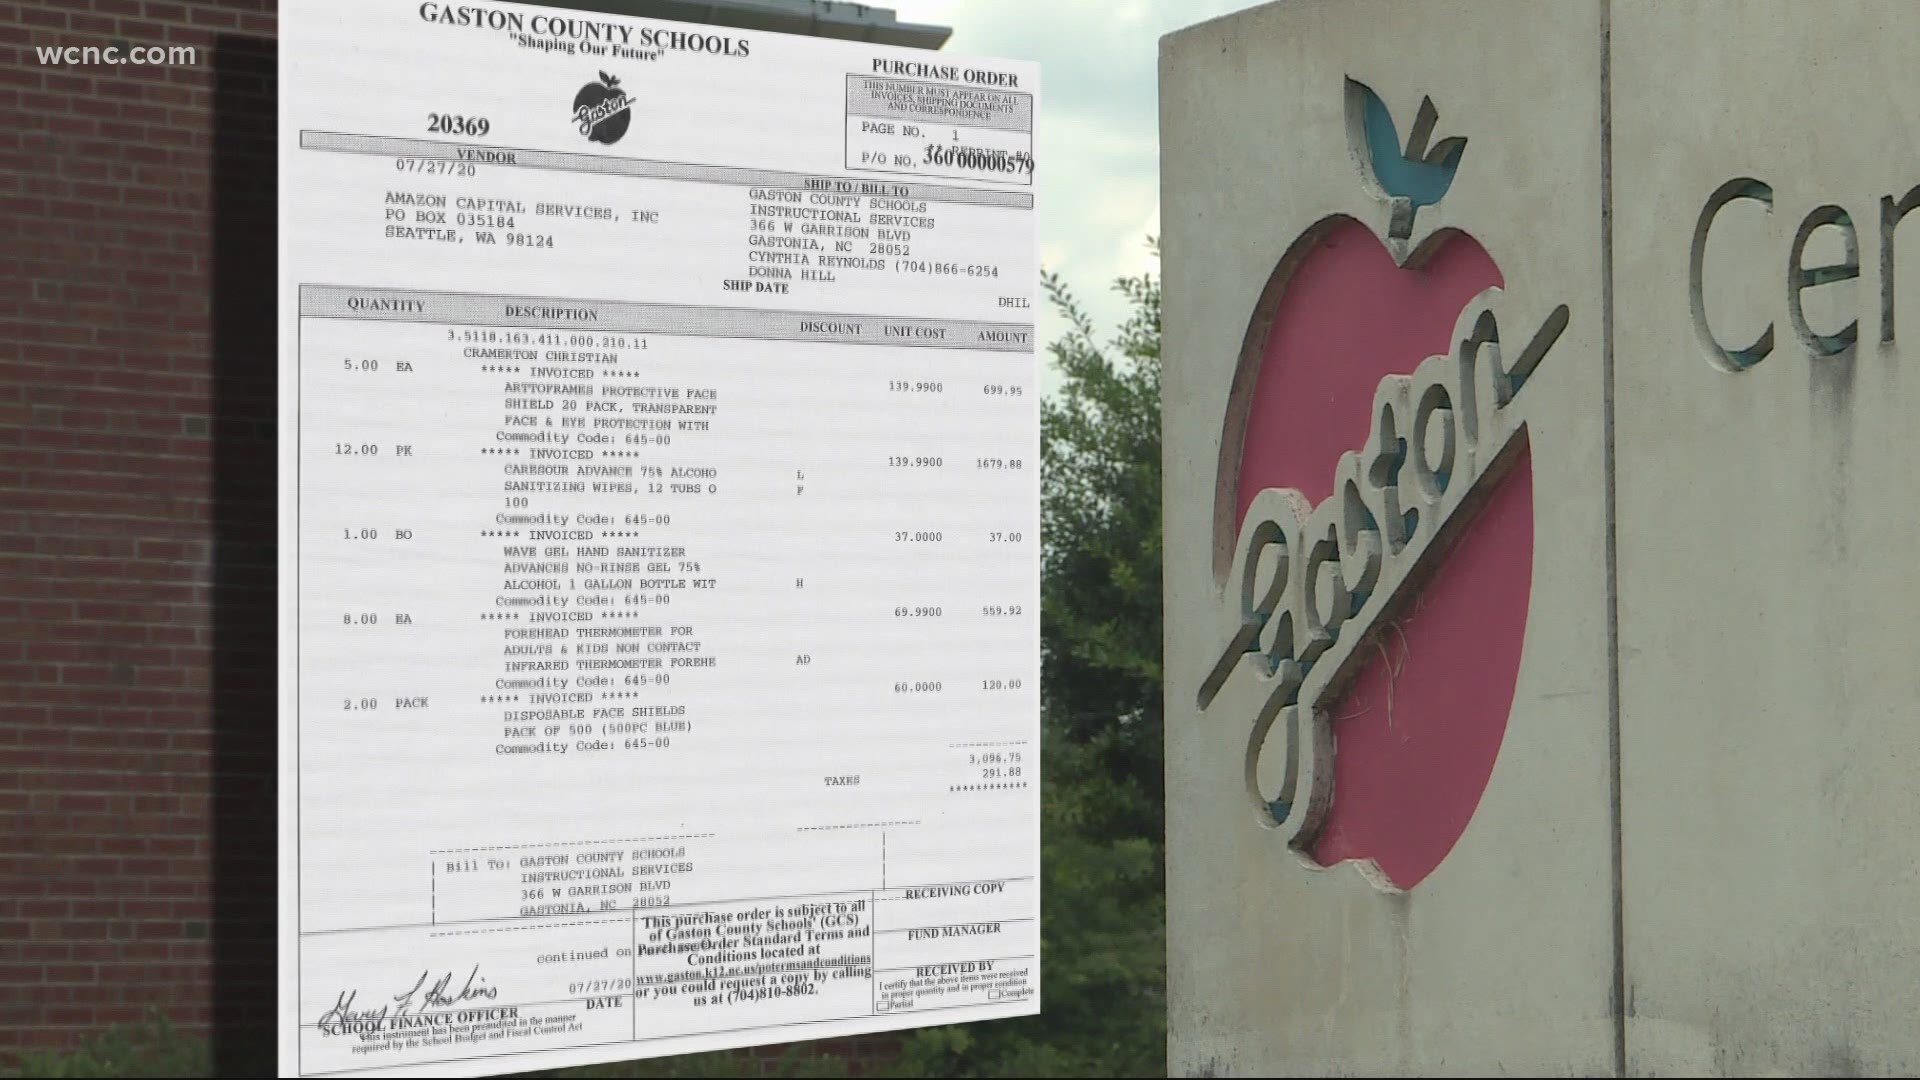 Gaston County schools spent more than $120,000 over the summer.